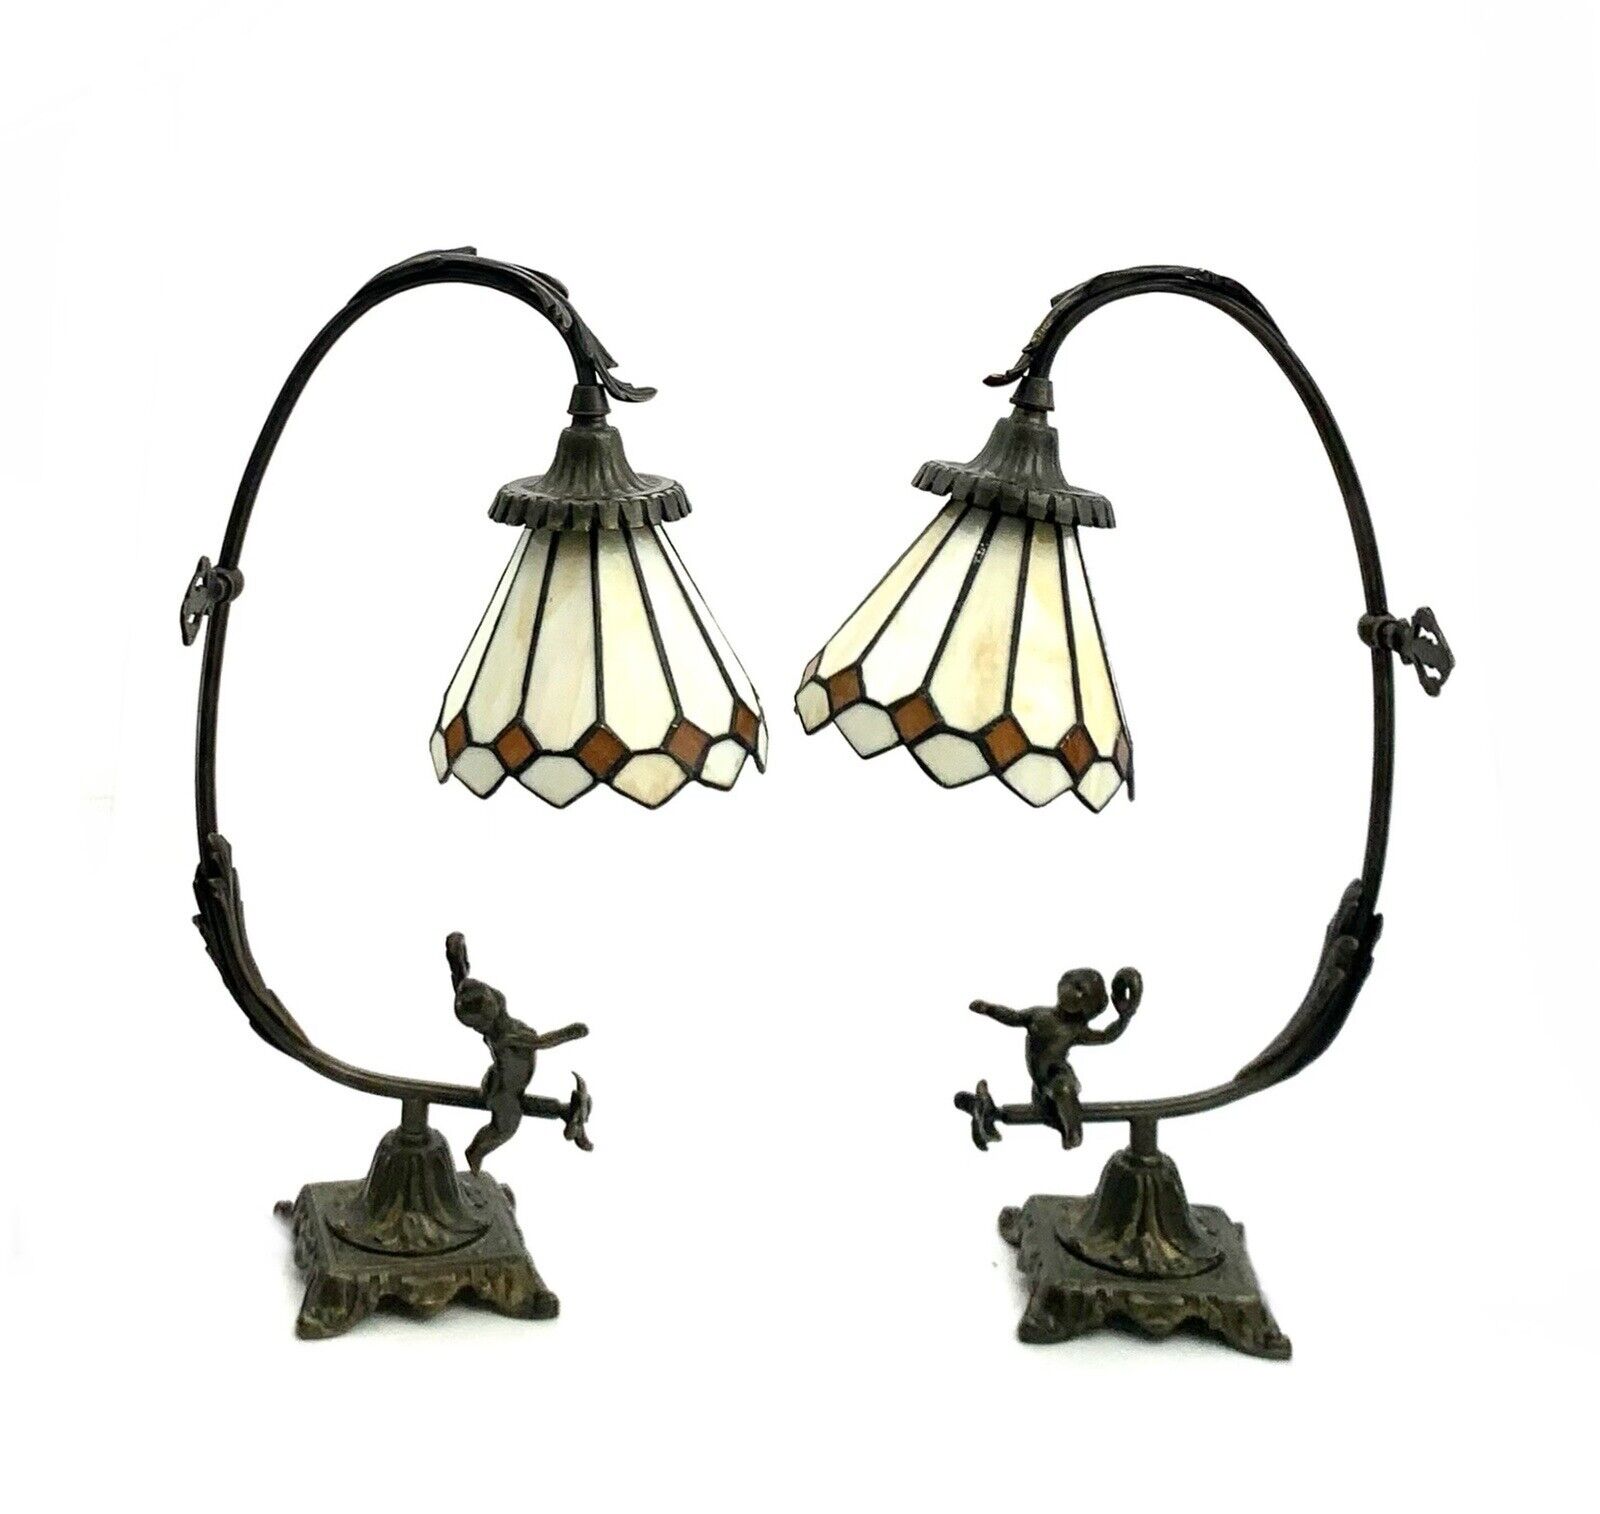 Lamp Cherub Design Metal with Stain Glass Shade Pair Old Vintage Decor